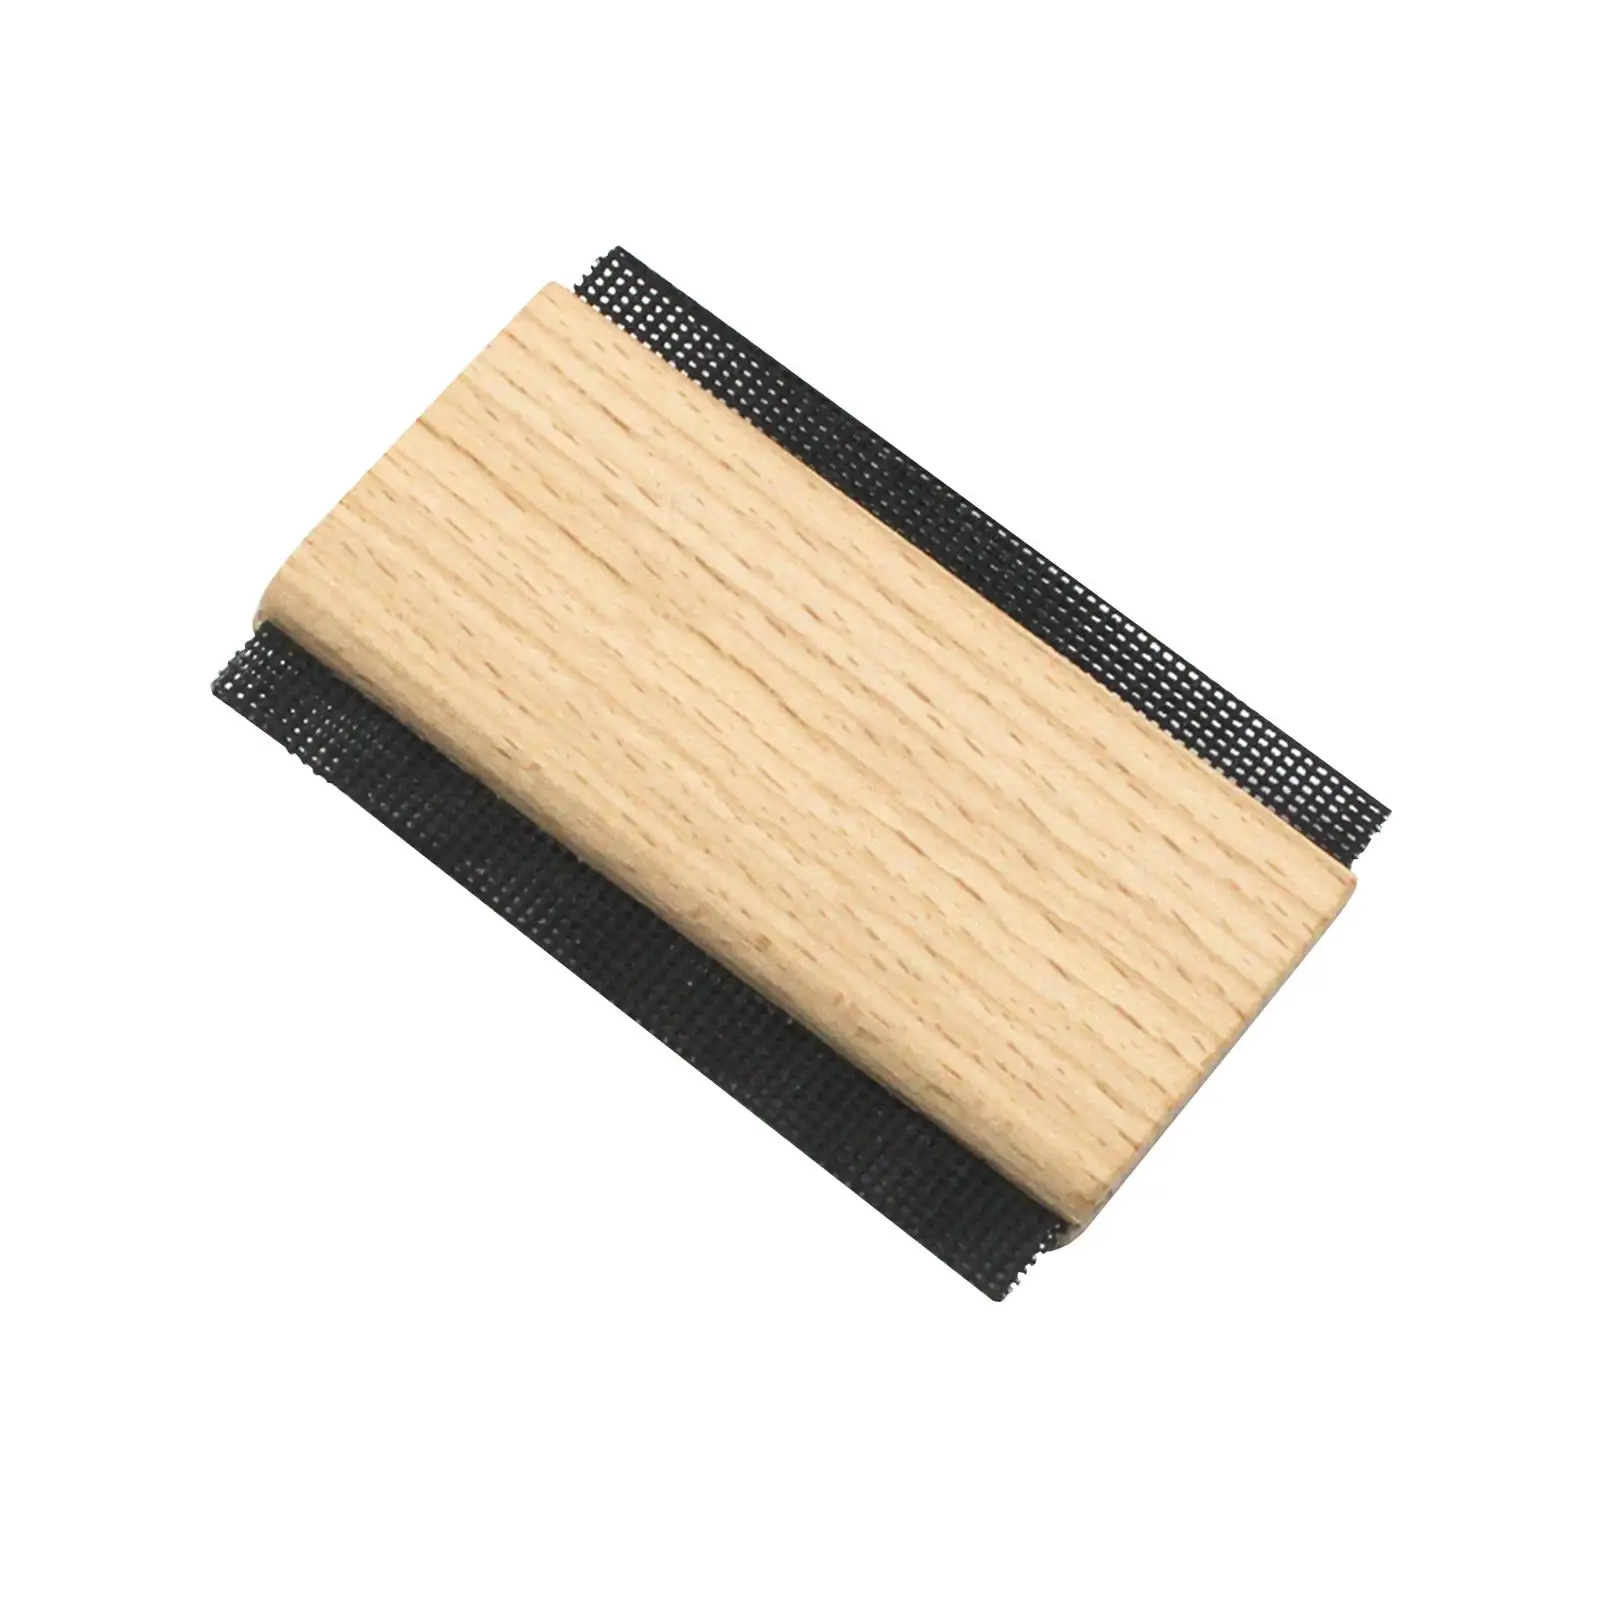 Portable Cashmere Comb Manual Wool Comb to Remove Pilling Fuzz Sweater Shaver for Knits Woolens Coats Garments Fabric Clothes